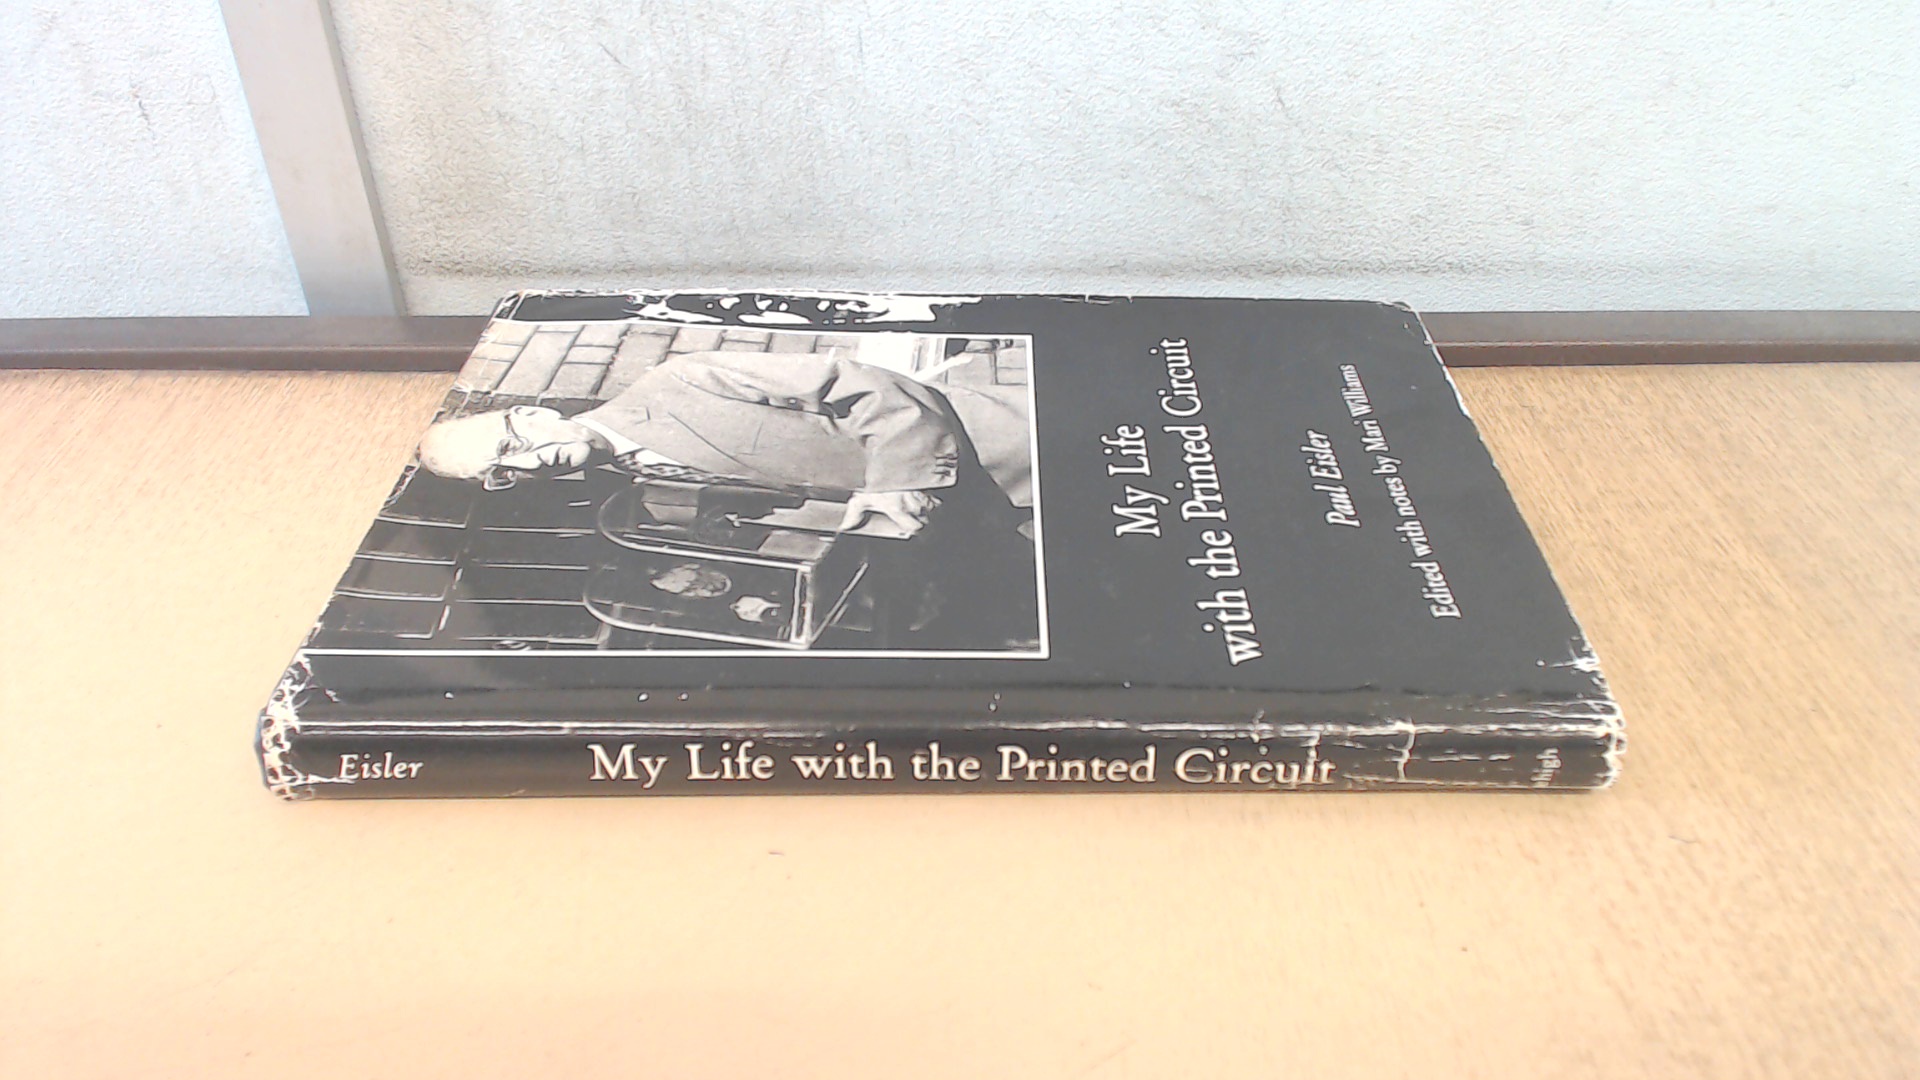 My Life with the Printed Circuit - Eisler, Paul